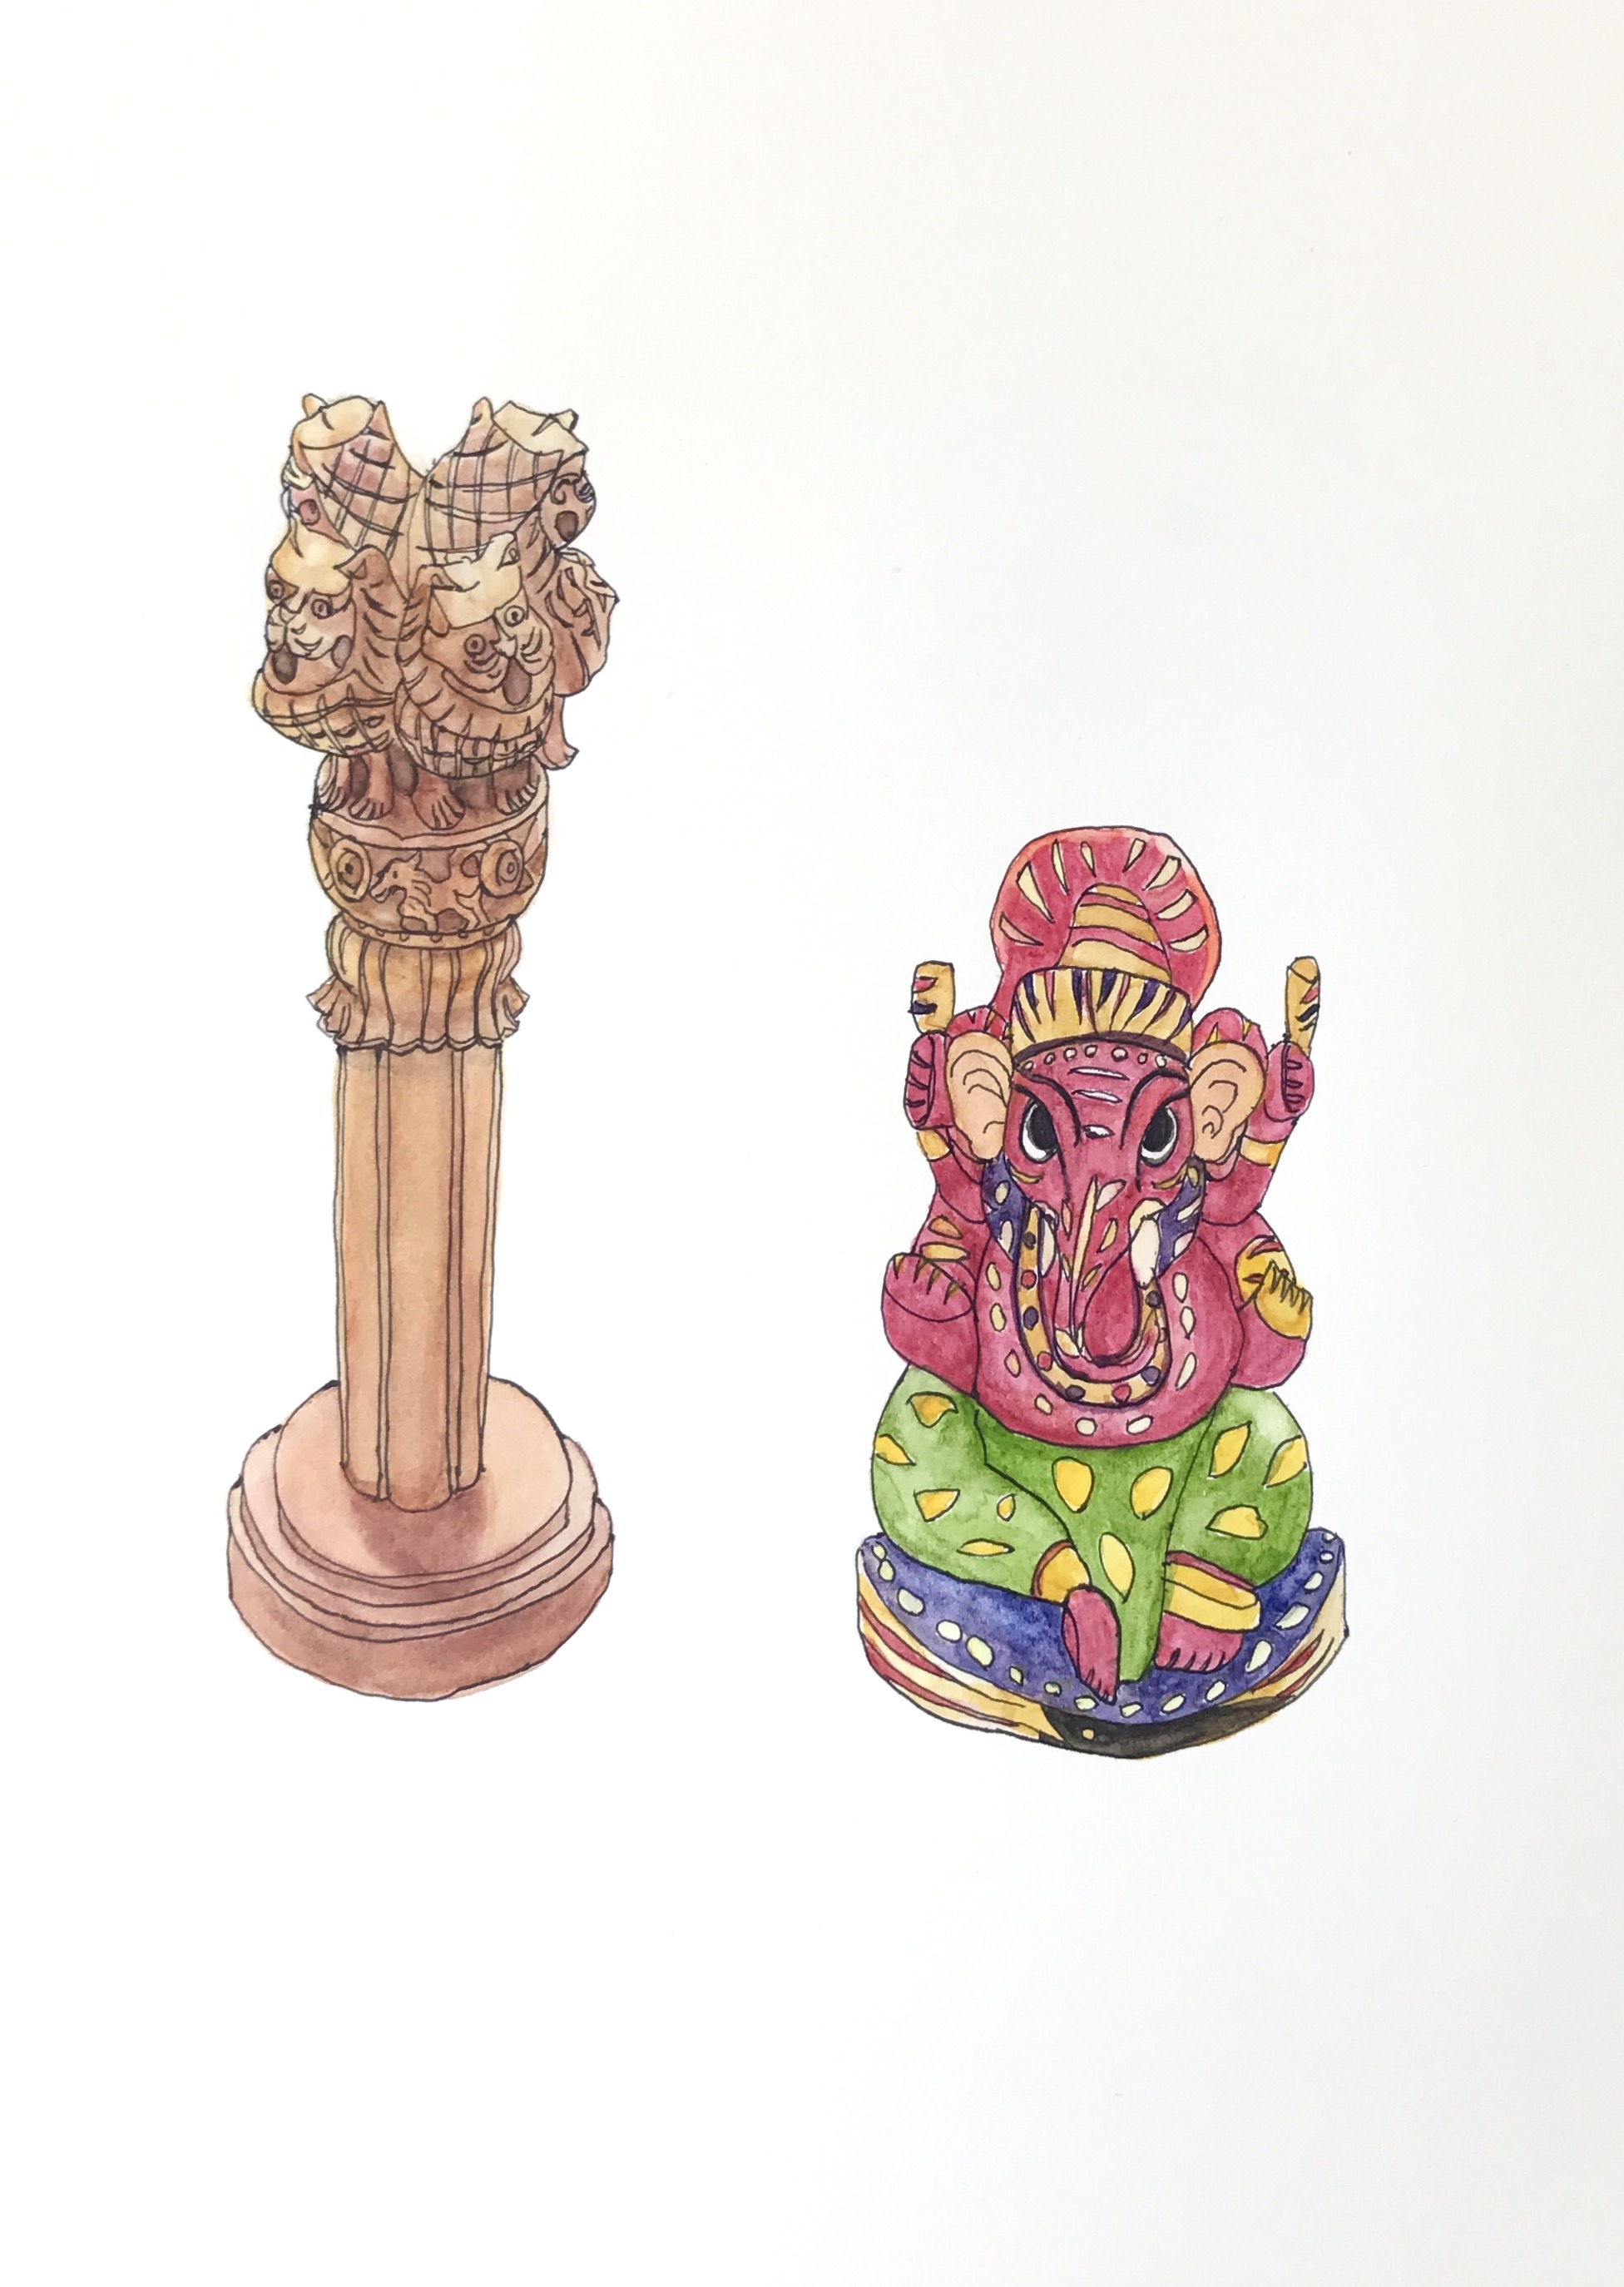 wood carvings from India